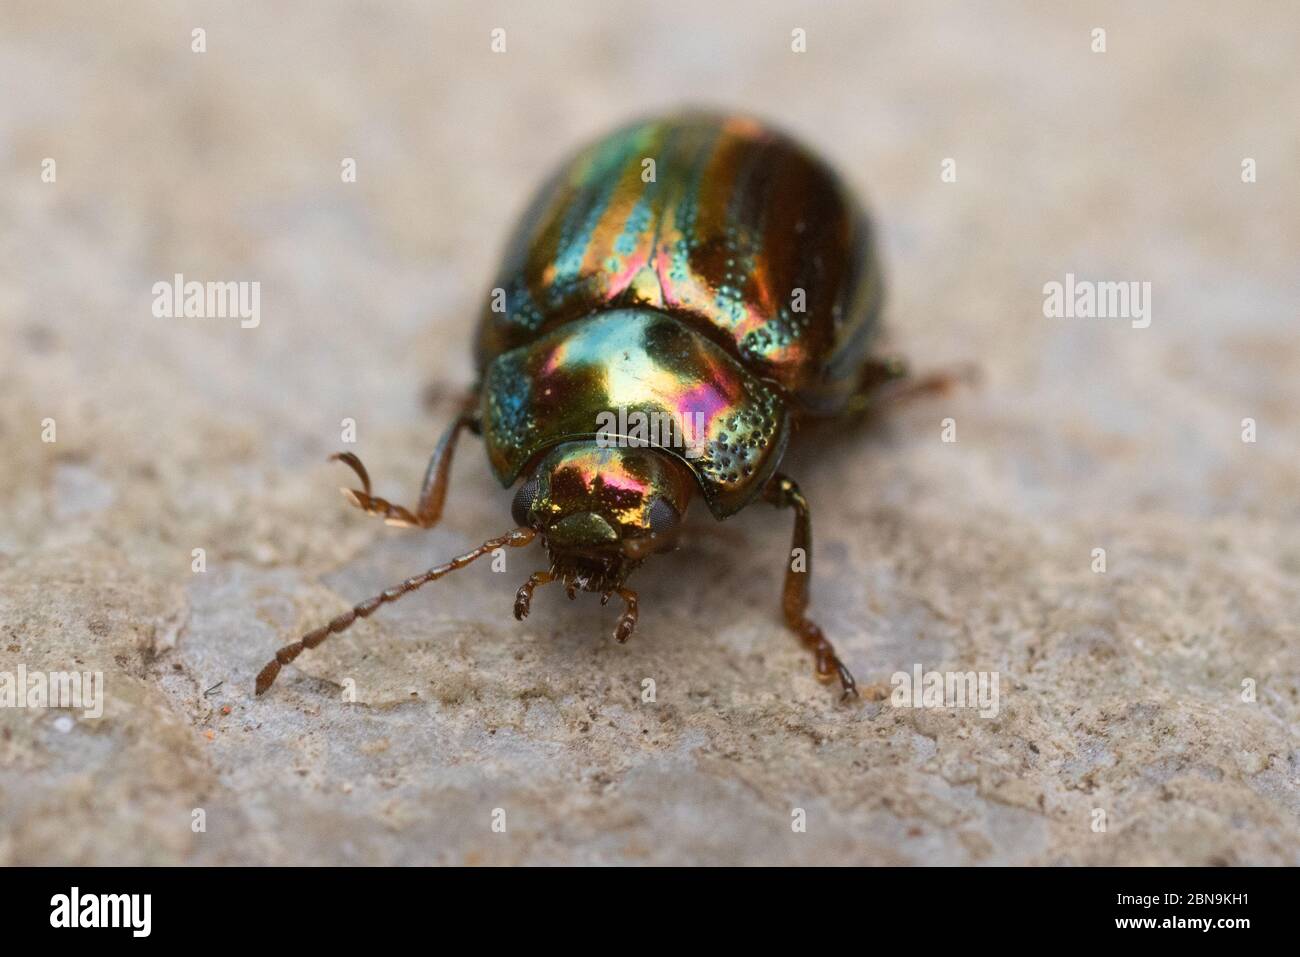 Rosemary beetle is an insect that eats the foliage and flowers of various aromatic plants, such as rosemary, lavender, sage and thyme. Stock Photo